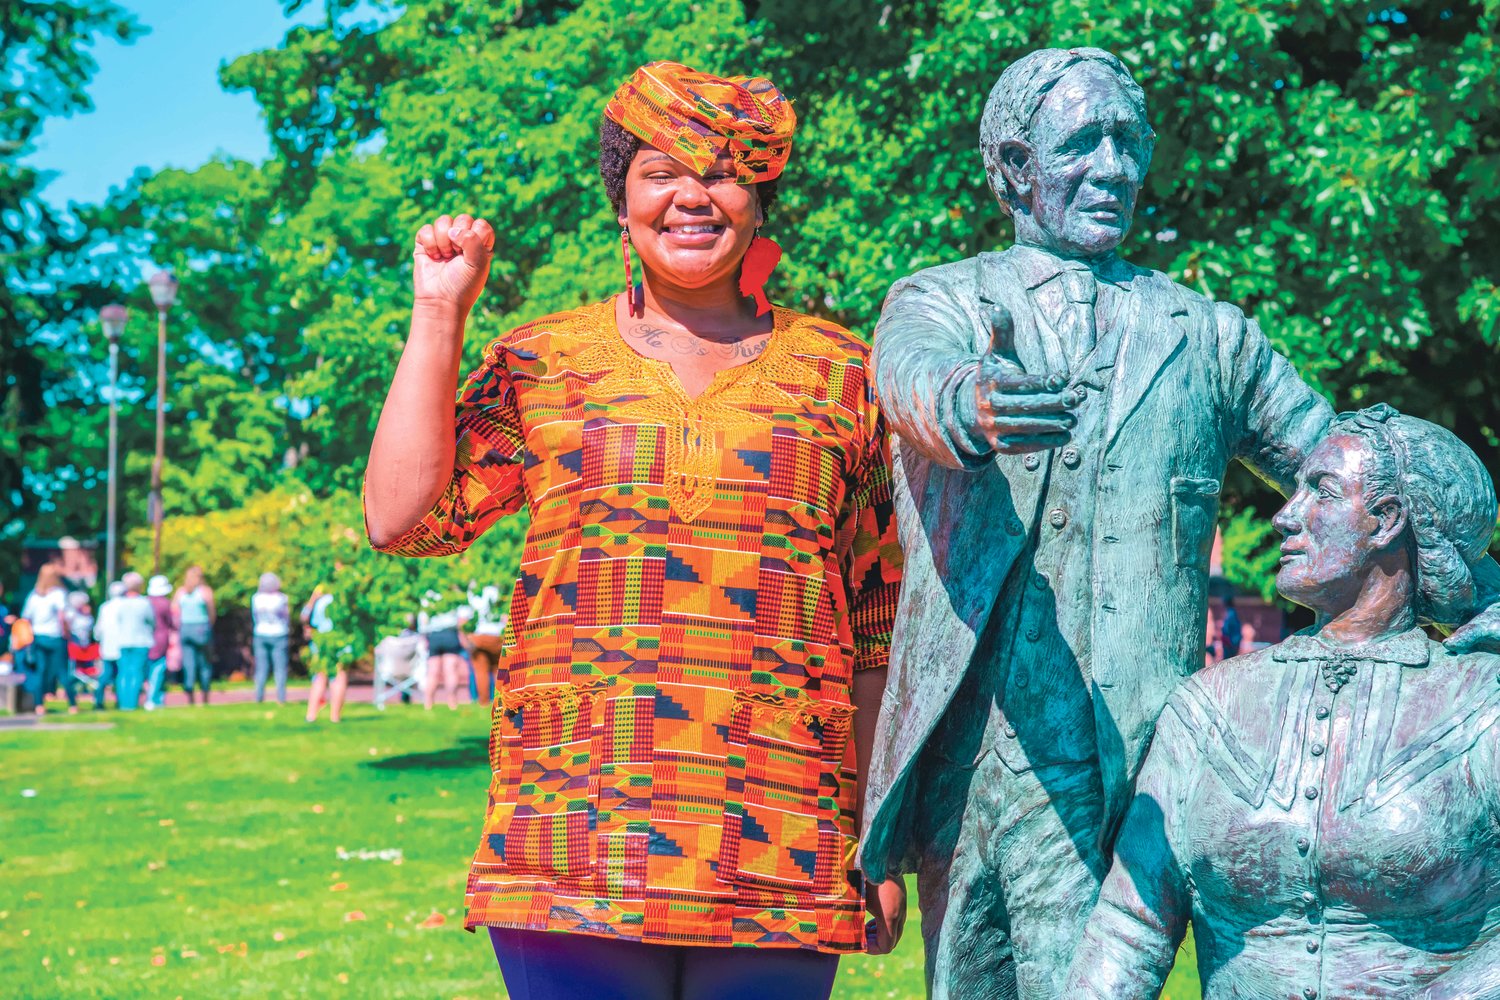 DE'Erica Waggener smiles and holds up her fist while posing next to the statue at George Washington Park during Juneteenth celebrations in Centralia on Saturday.